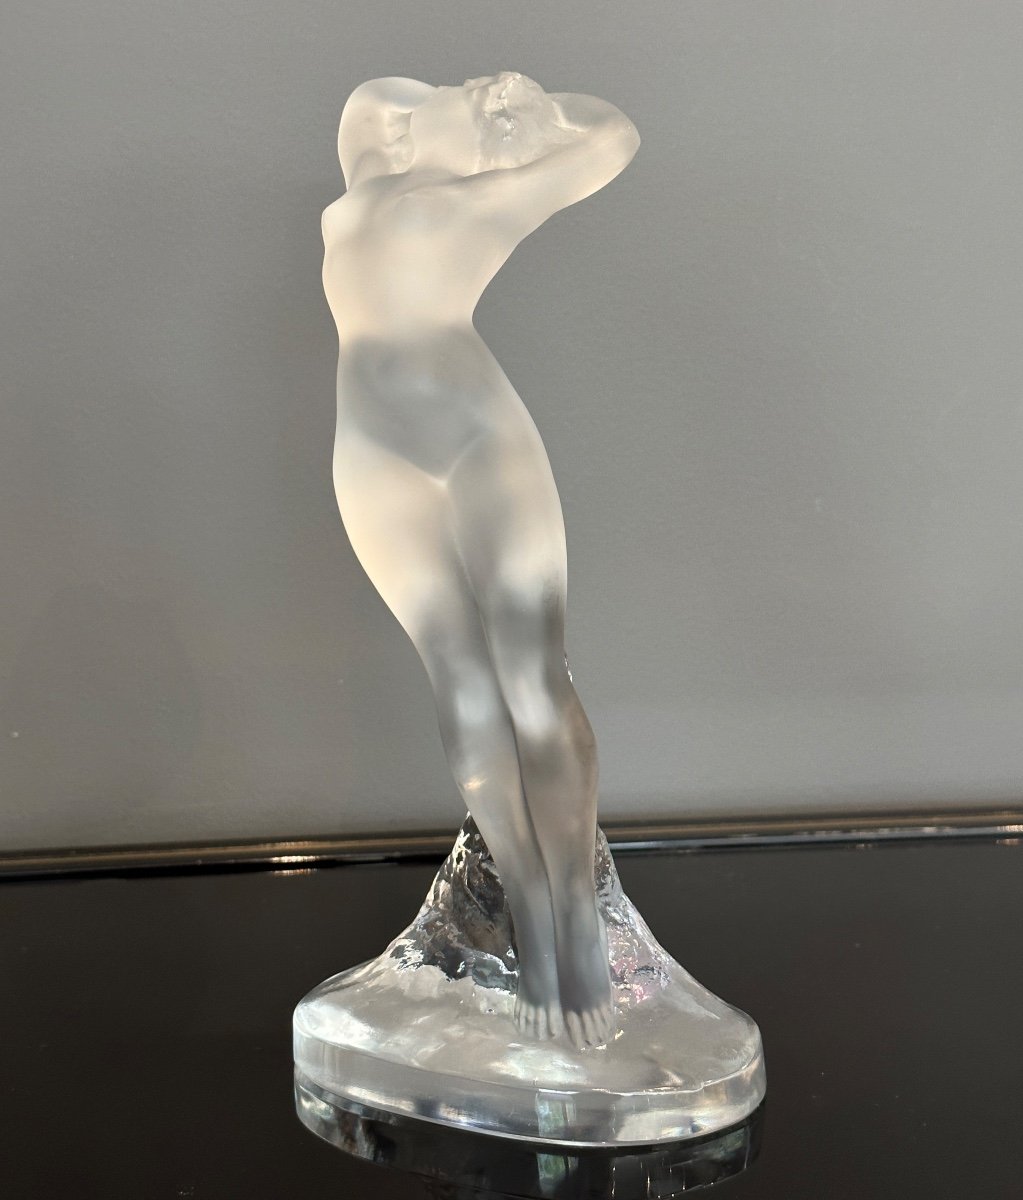 Naked Woman Sculpture Lalique Crystal 20th Century